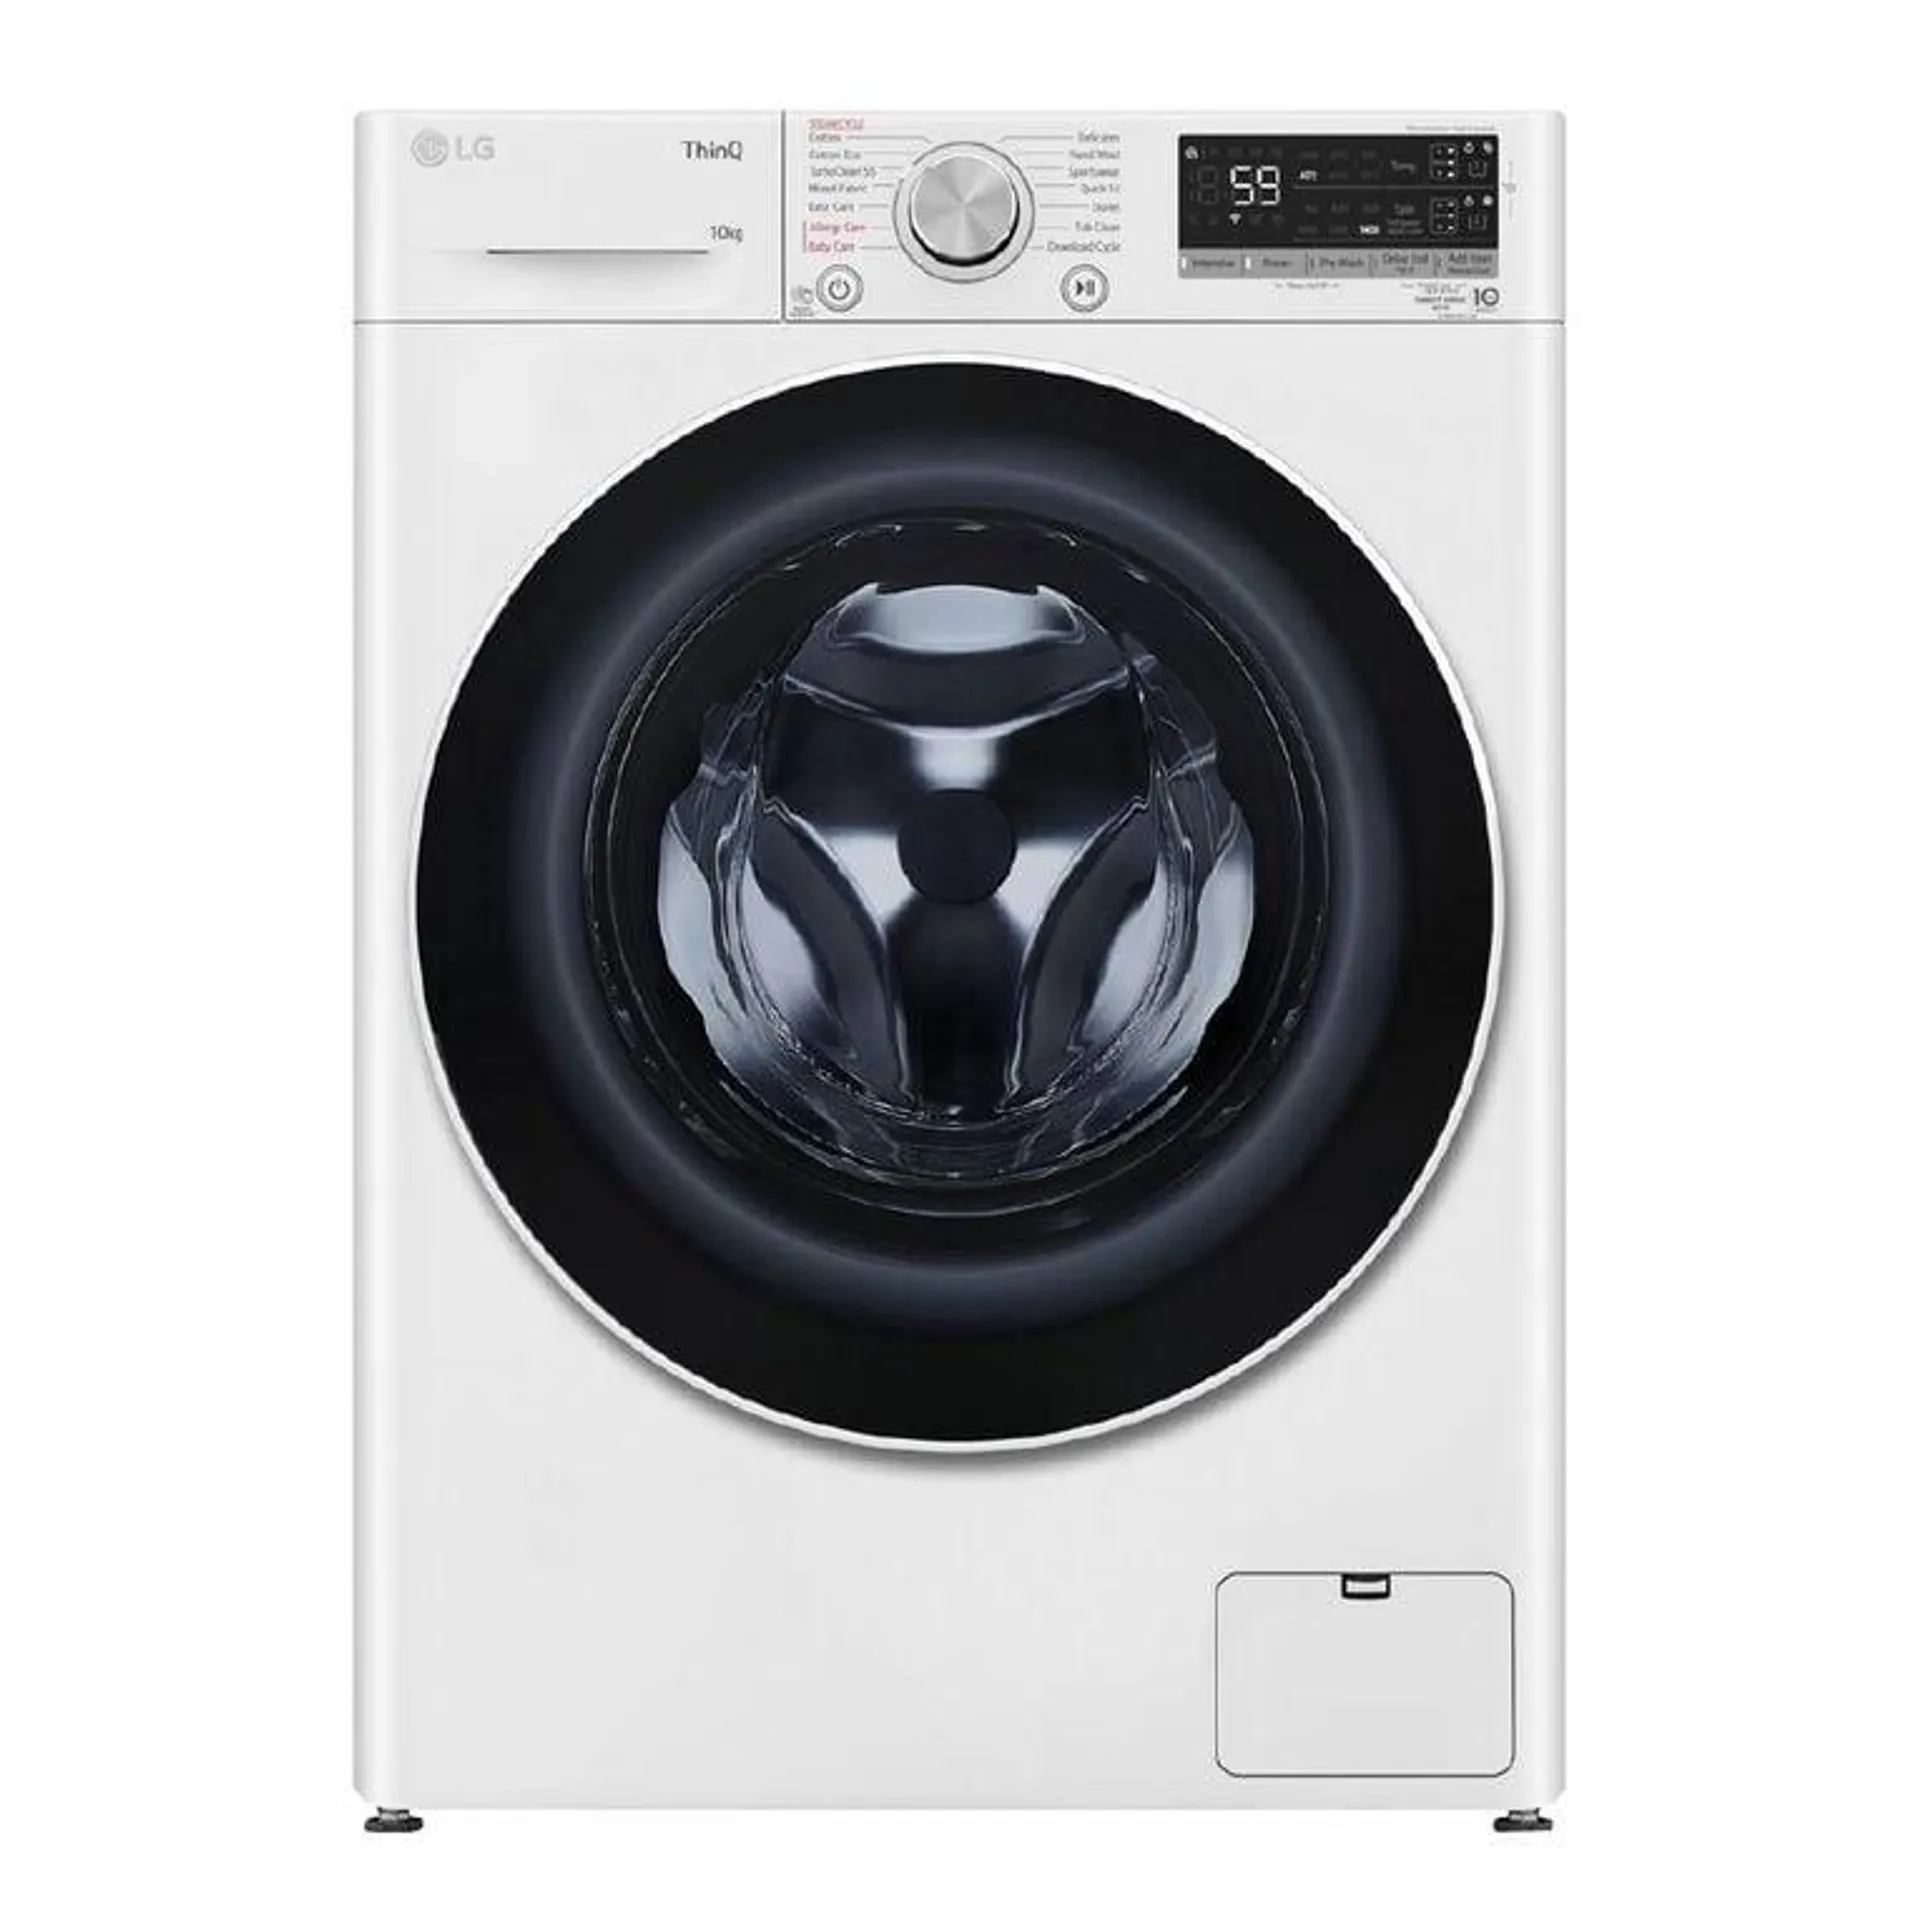 LG 10kg Front Load Washing Machine with Steam, ezDispense, Turbo Clean and Direct Drive Motor